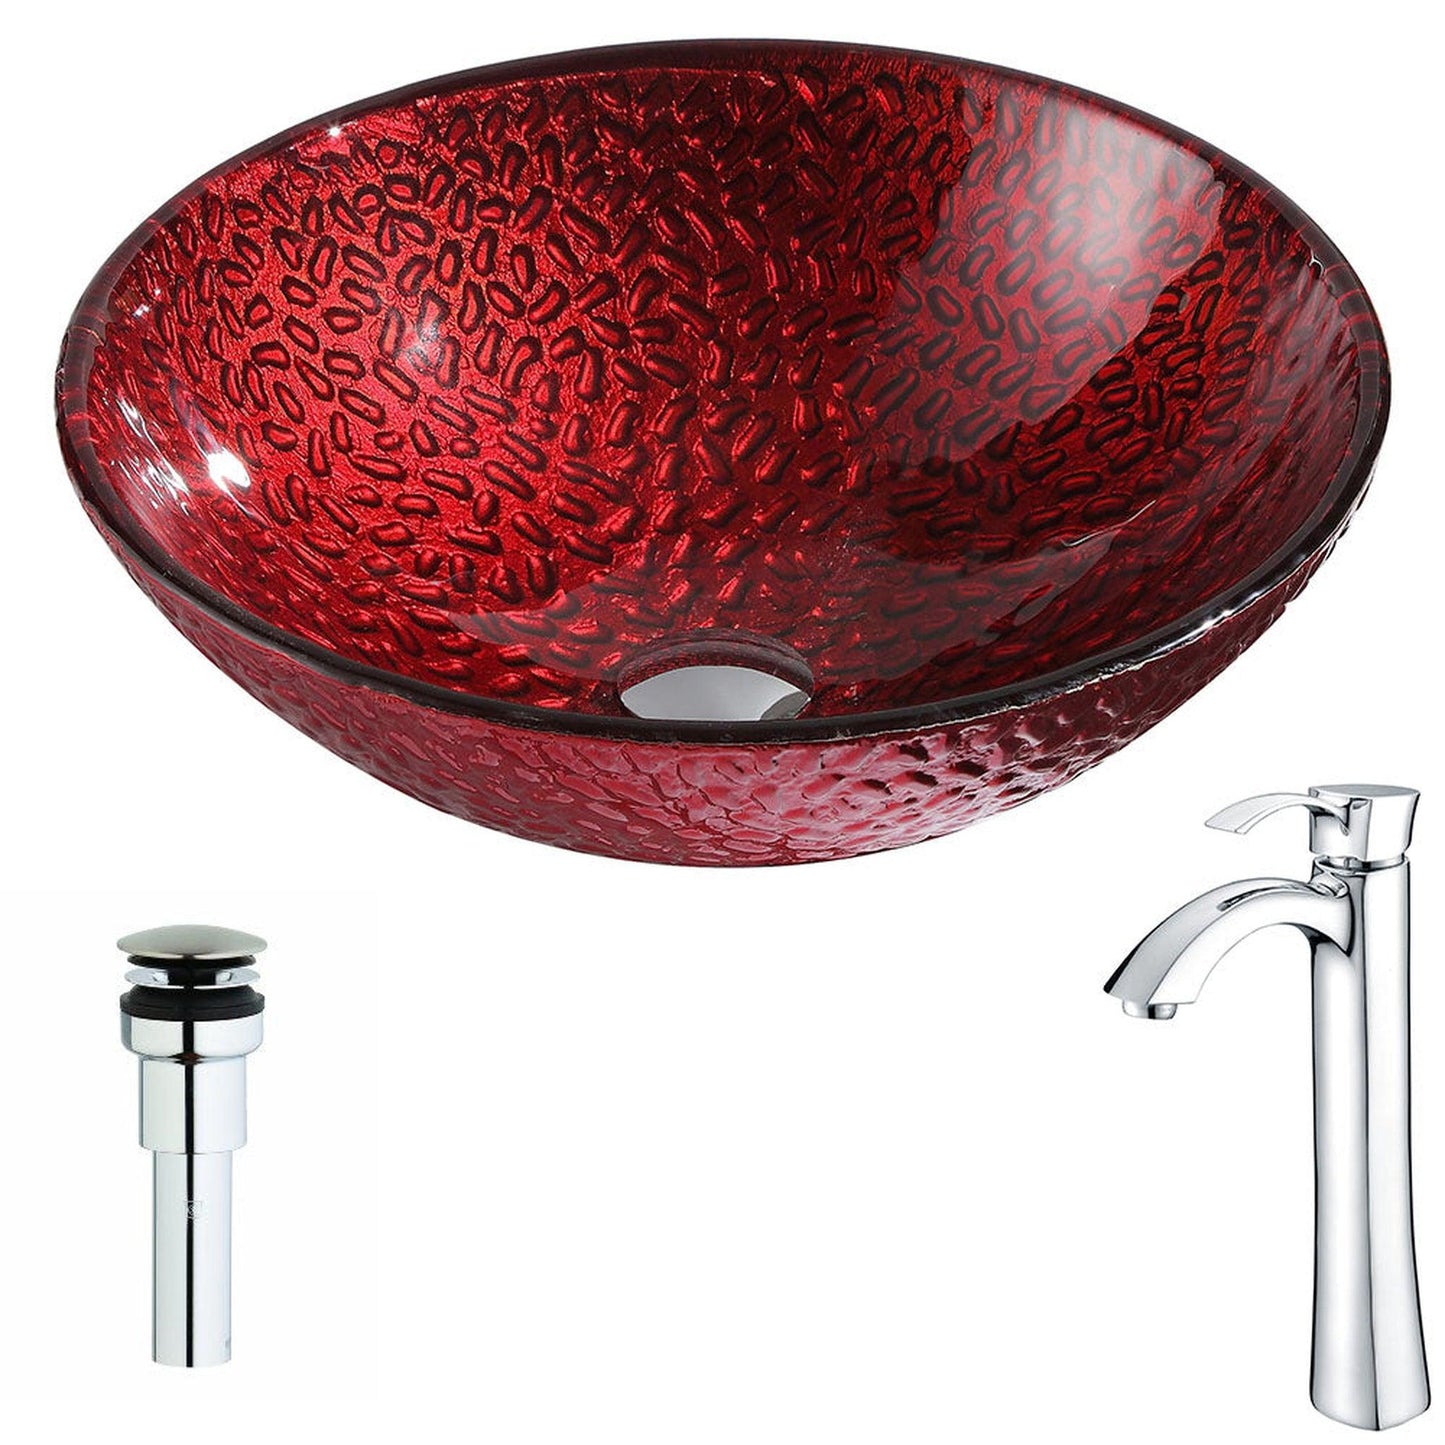 ANZZI Rhythm Series 17" x 17" Round Lustrous Red Deco-Glass Vessel Sink With Polished Chrome Pop-Up Drain and Brushed Nickel Key Faucet